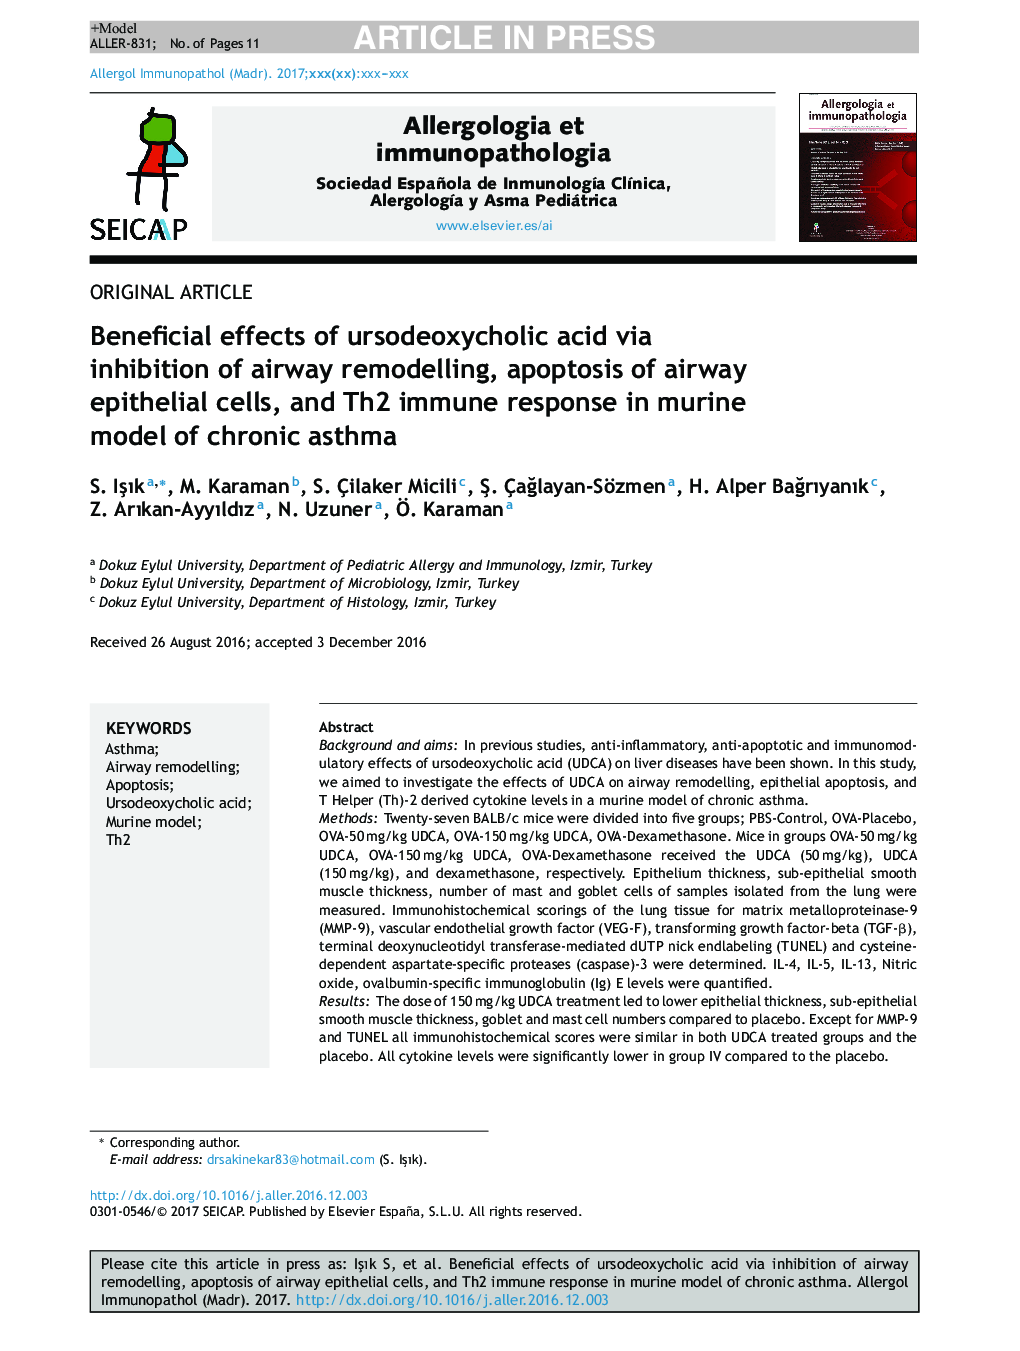 Beneficial effects of ursodeoxycholic acid via inhibition of airway remodelling, apoptosis of airway epithelial cells, and Th2 immune response in murine model of chronic asthma